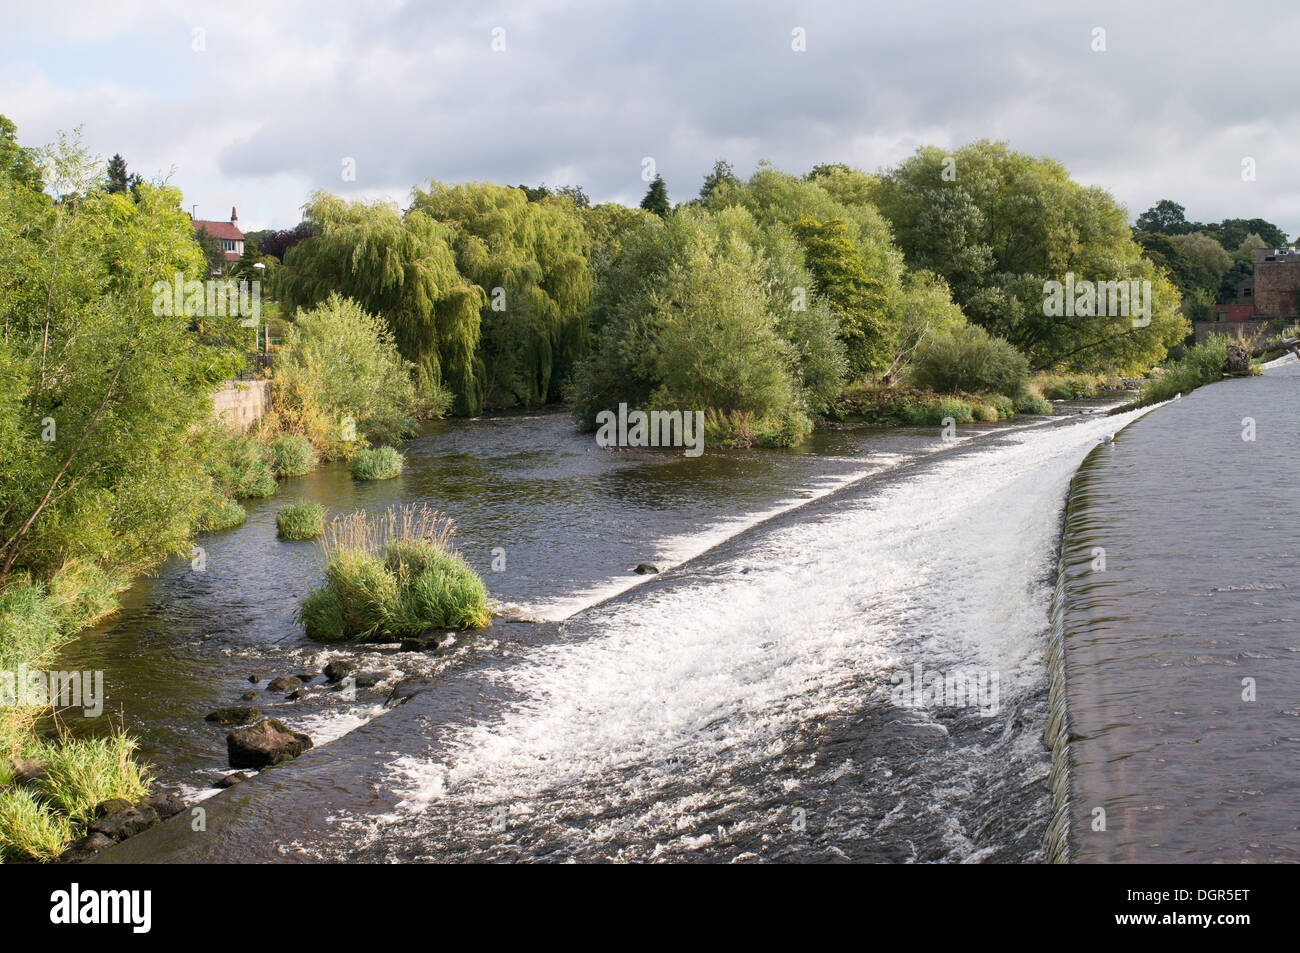 River Wharfe circulant sur Weir à Otley, Yorkshire, Angleterre, Royaume-Uni Banque D'Images